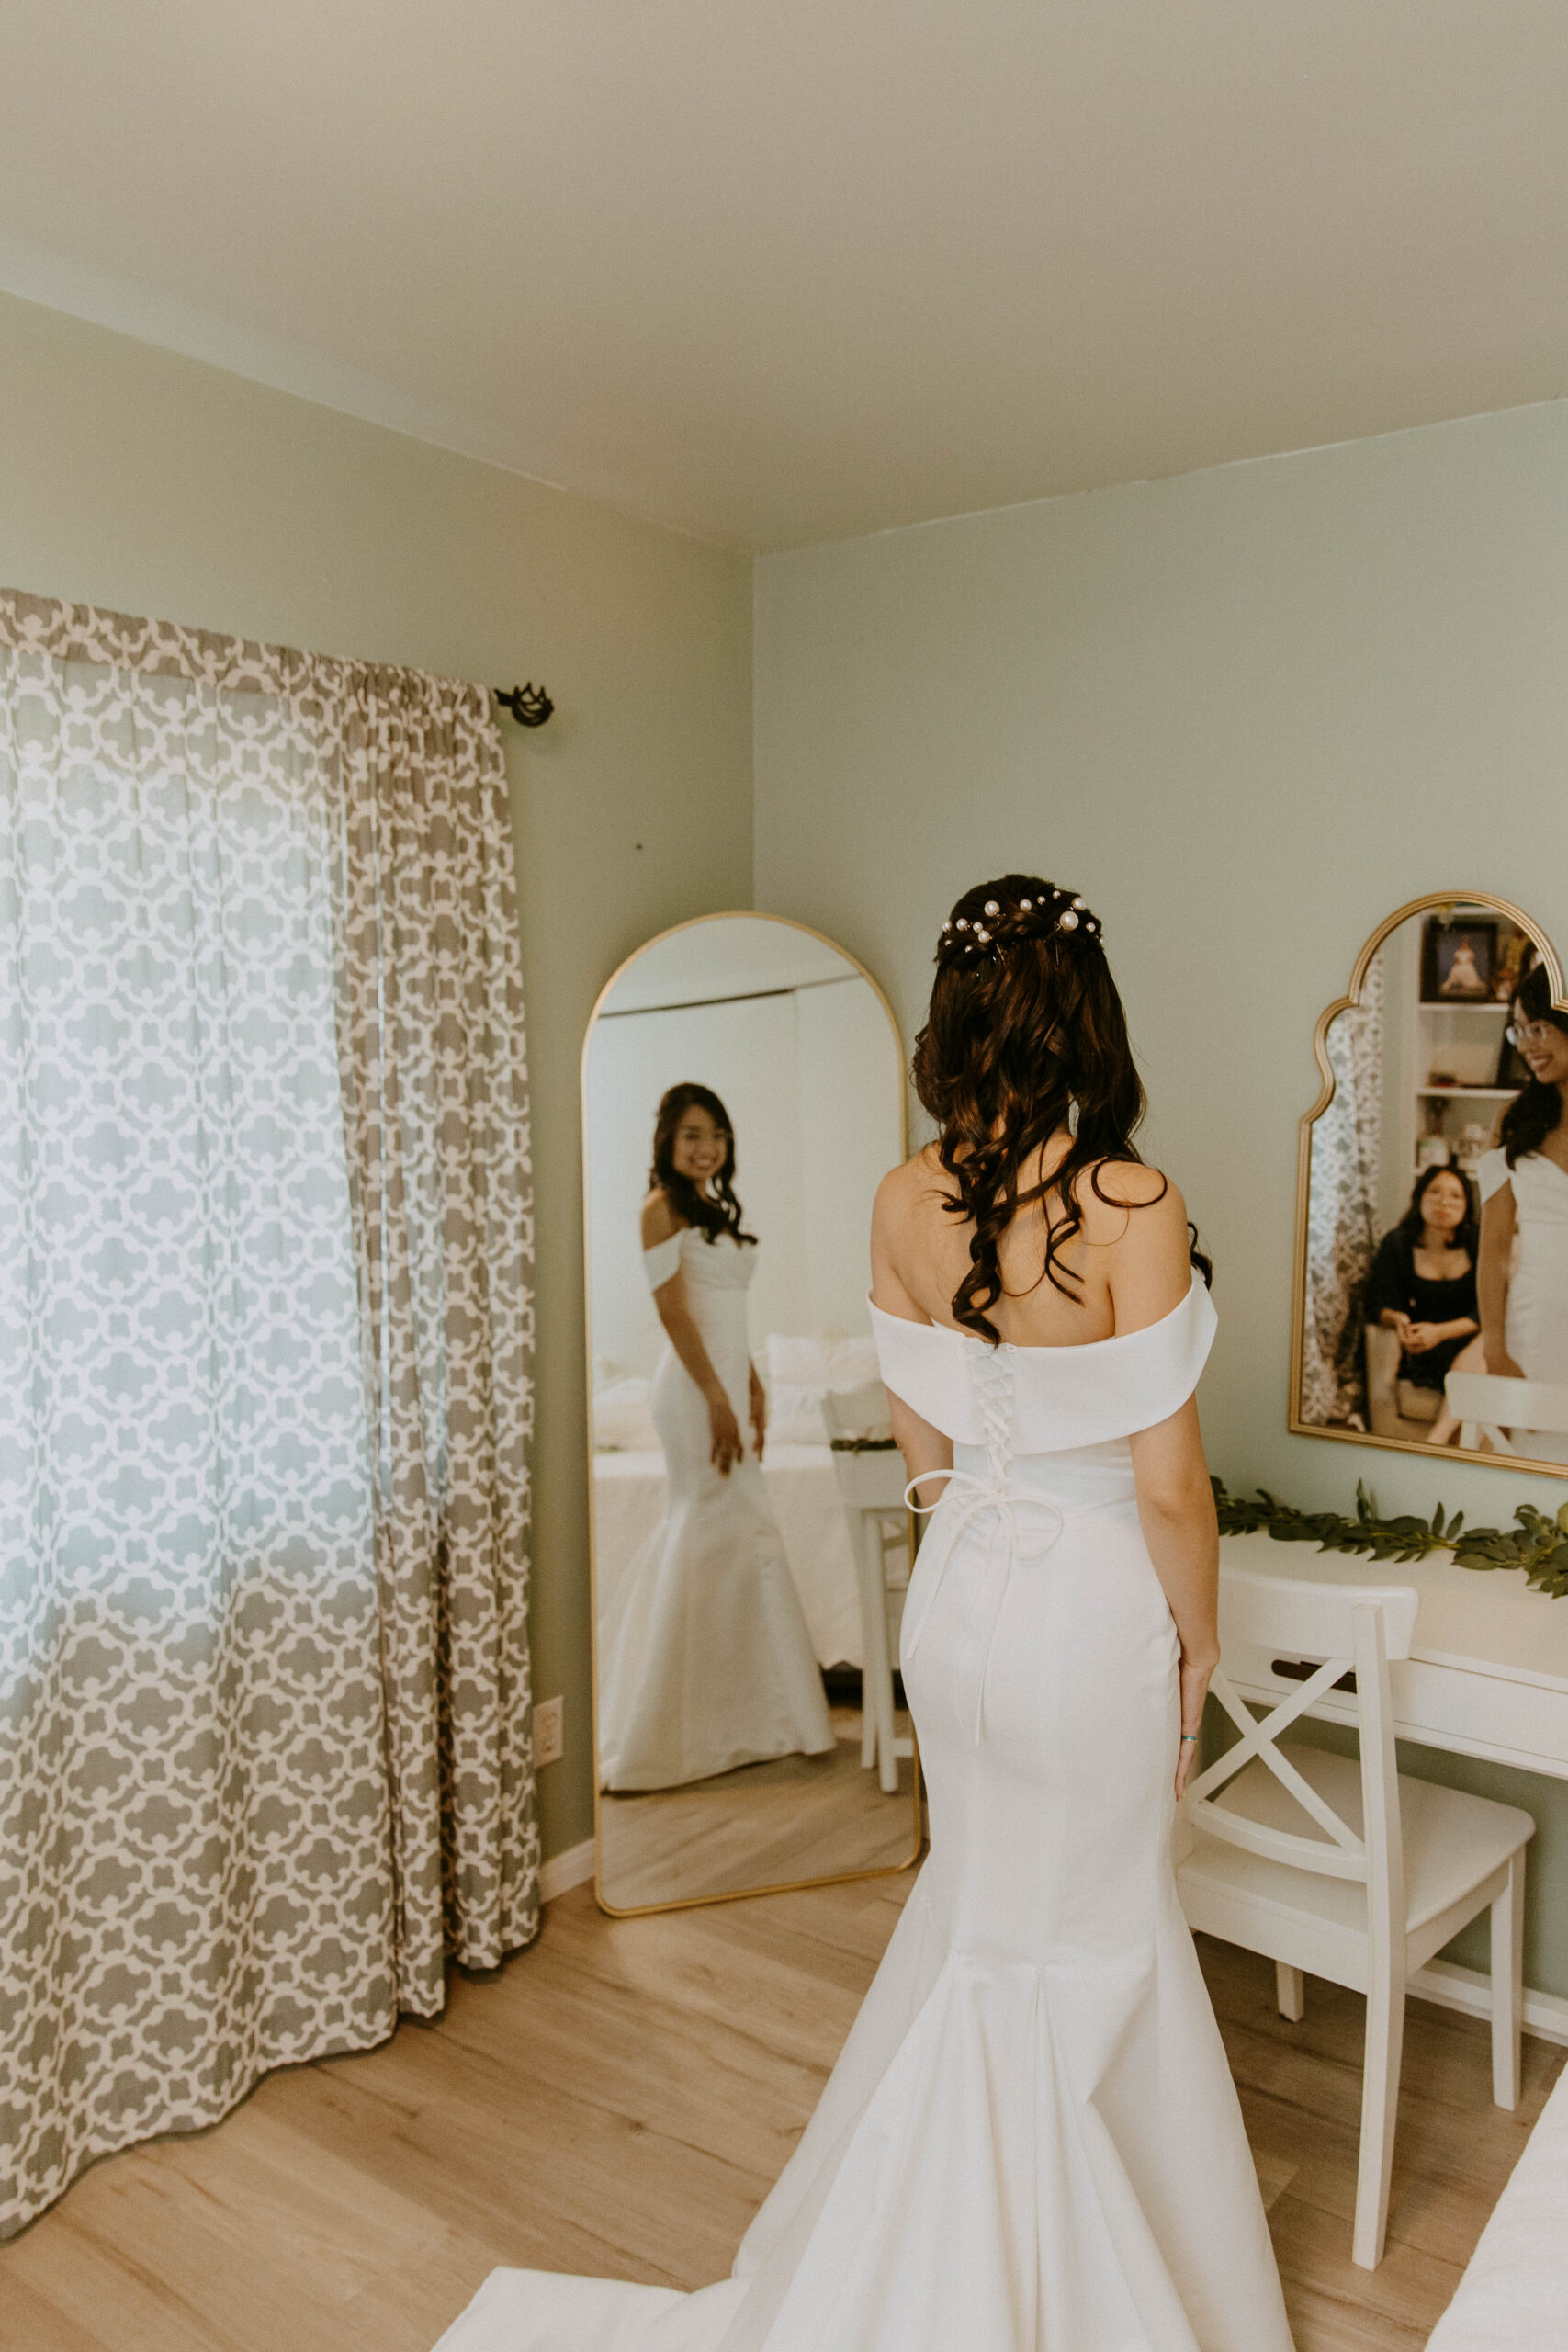 A woman in a white dress receives assistance with her wedding dress from another woman in a blue dress in front of a mirror.